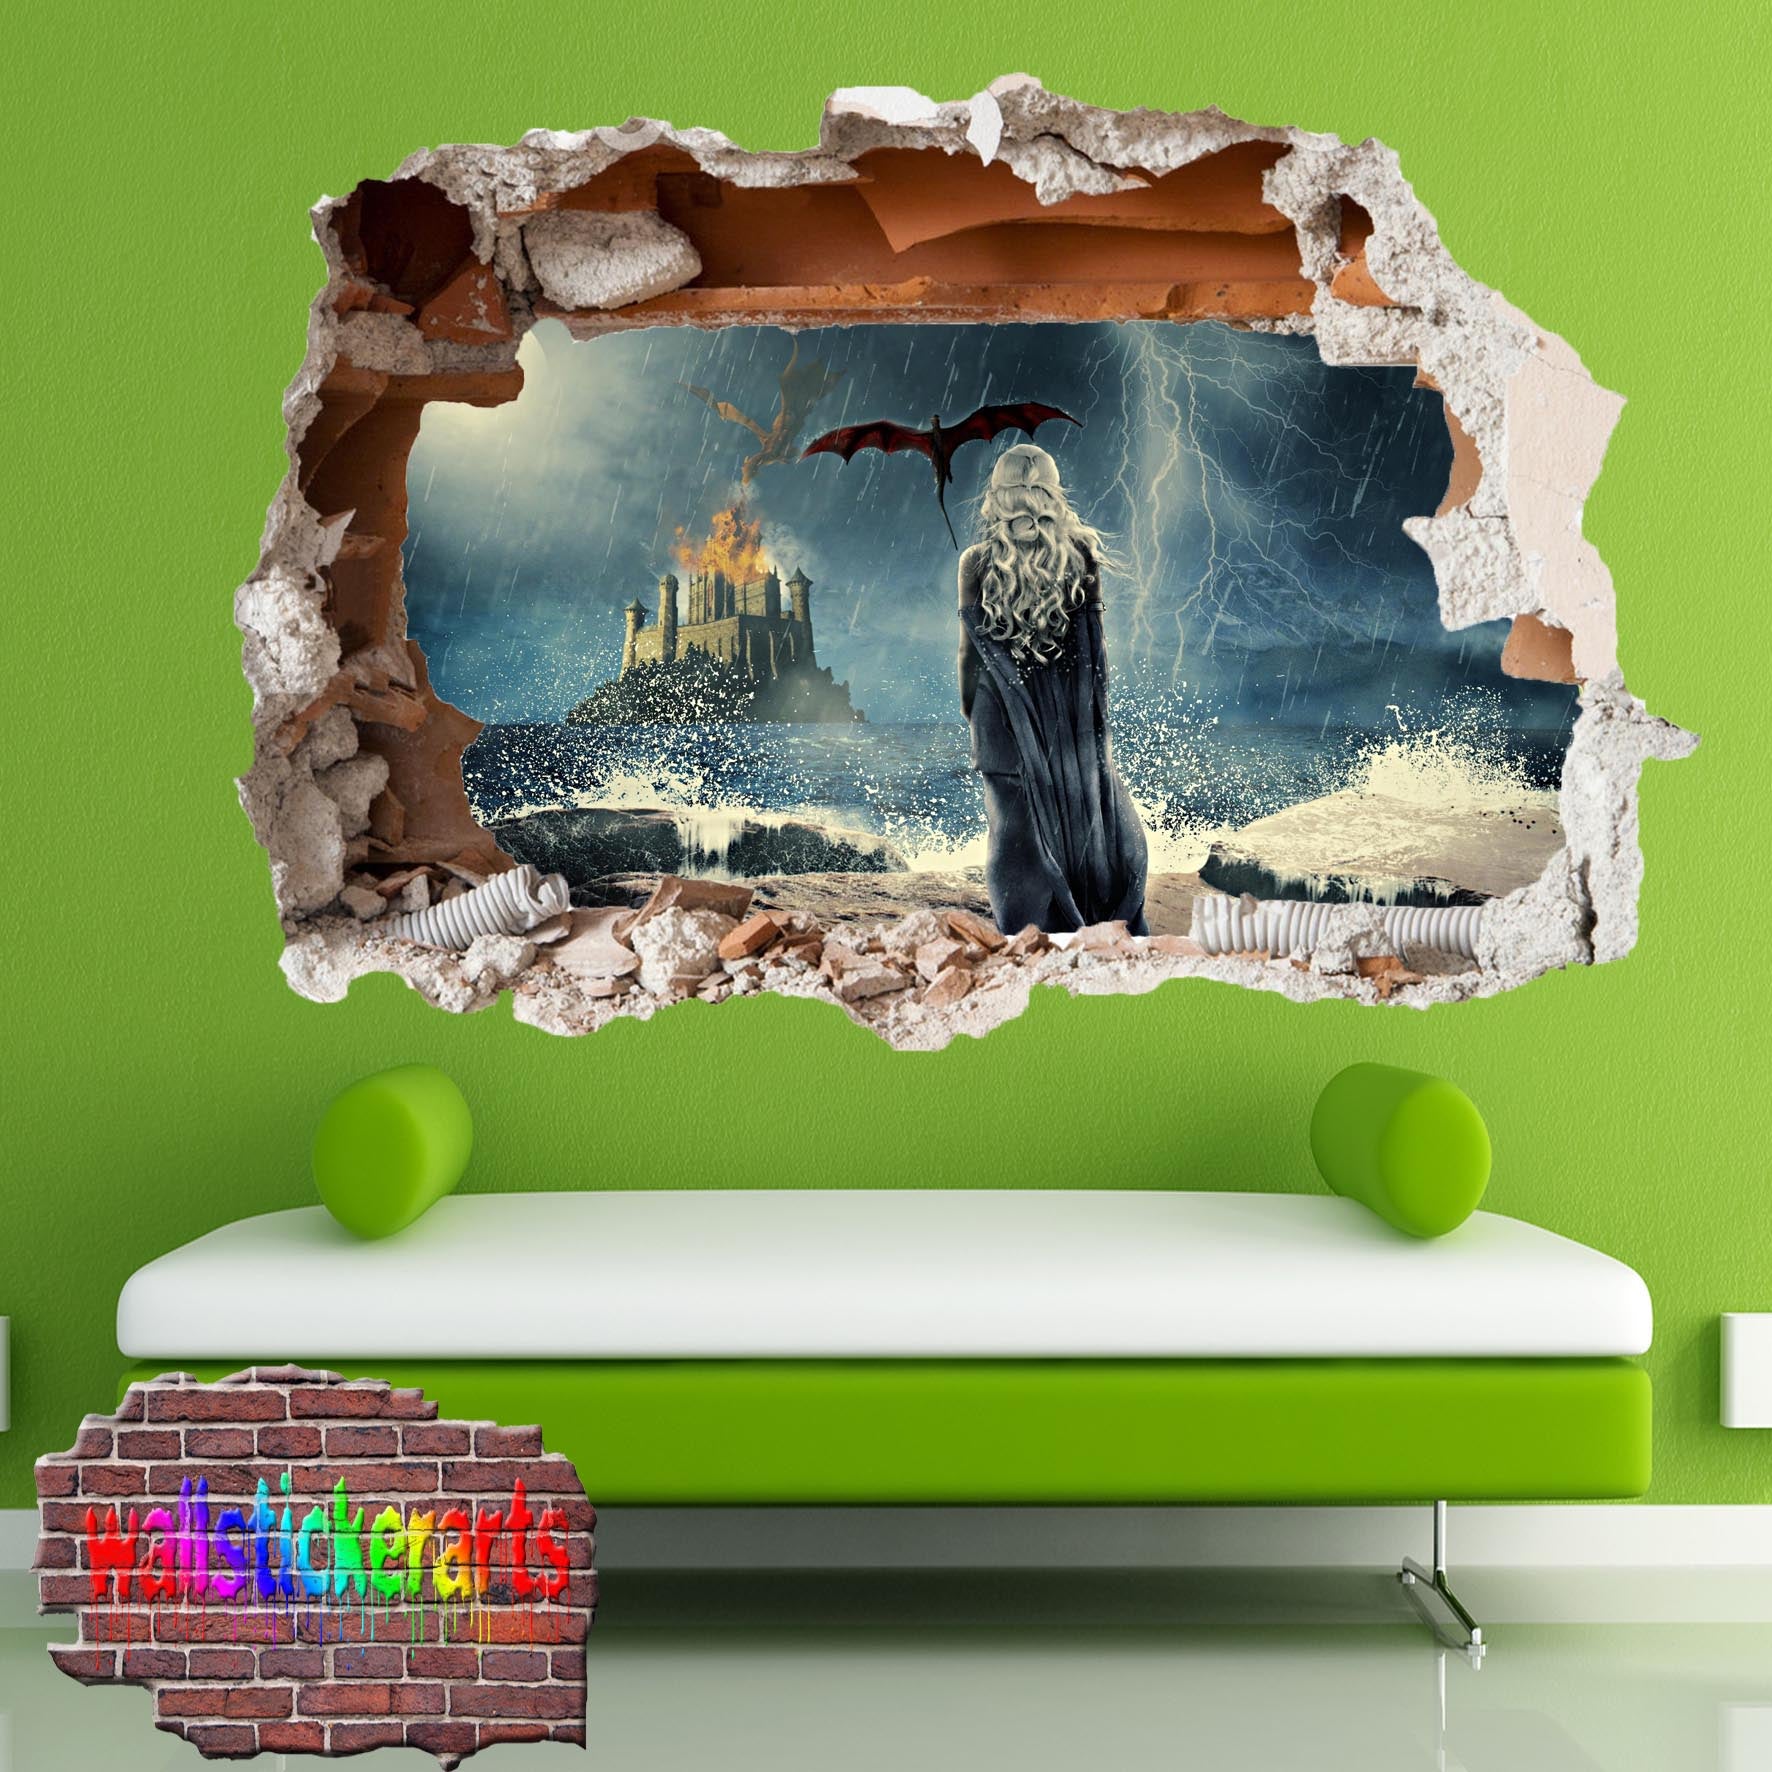 Game of Thrones Character Khaleesi wall sticker poster decal mural